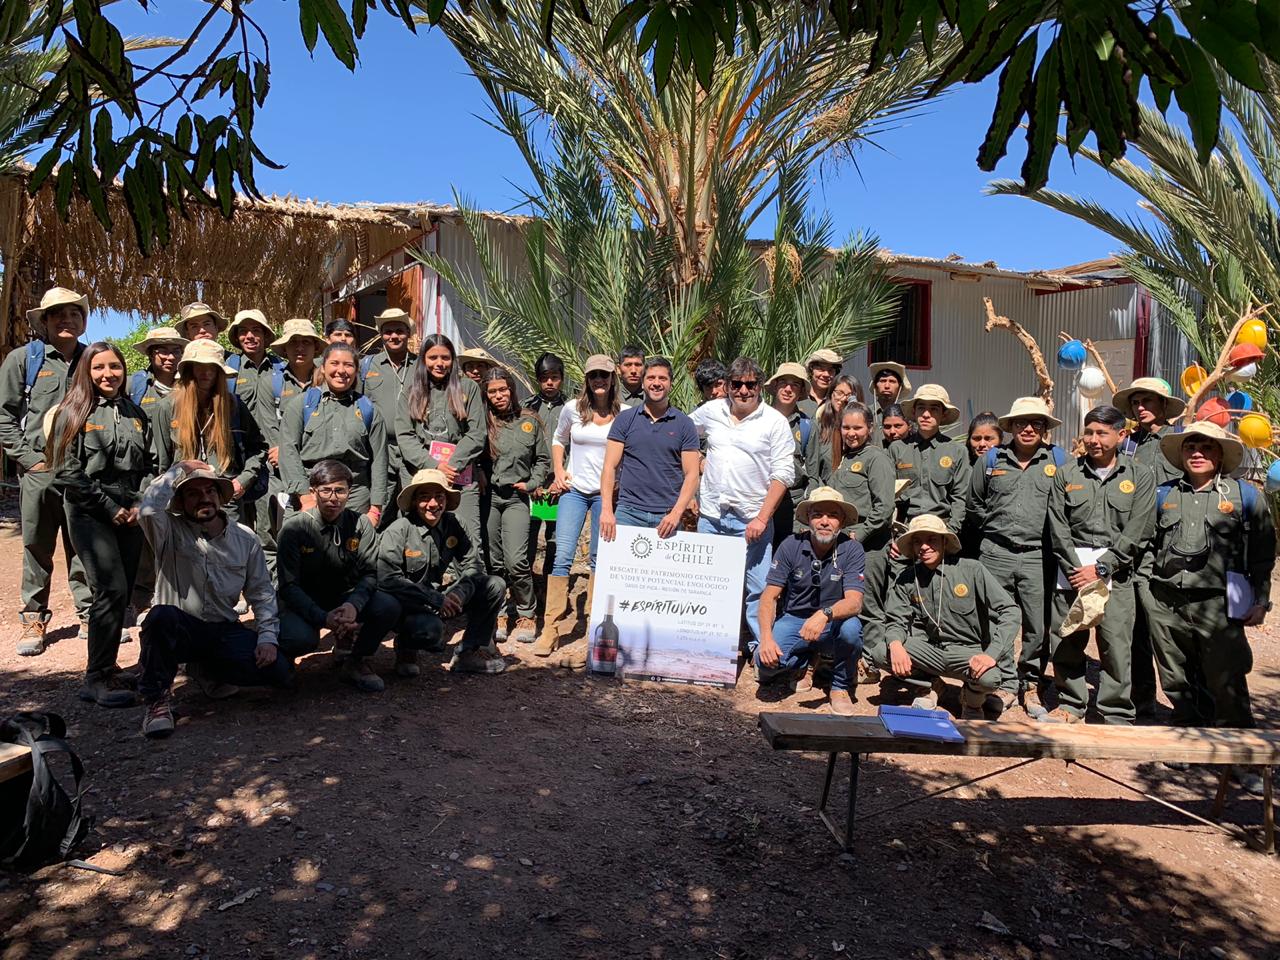 "Since the beginning of the project, we have worked together with the community of Pica, Matilla and Quisma, we have trained students from the agricultural school in the area and we have also provided technical support to growers,” says Marcelo Lorca, agricultural manager of Espiritu de Chile wines.